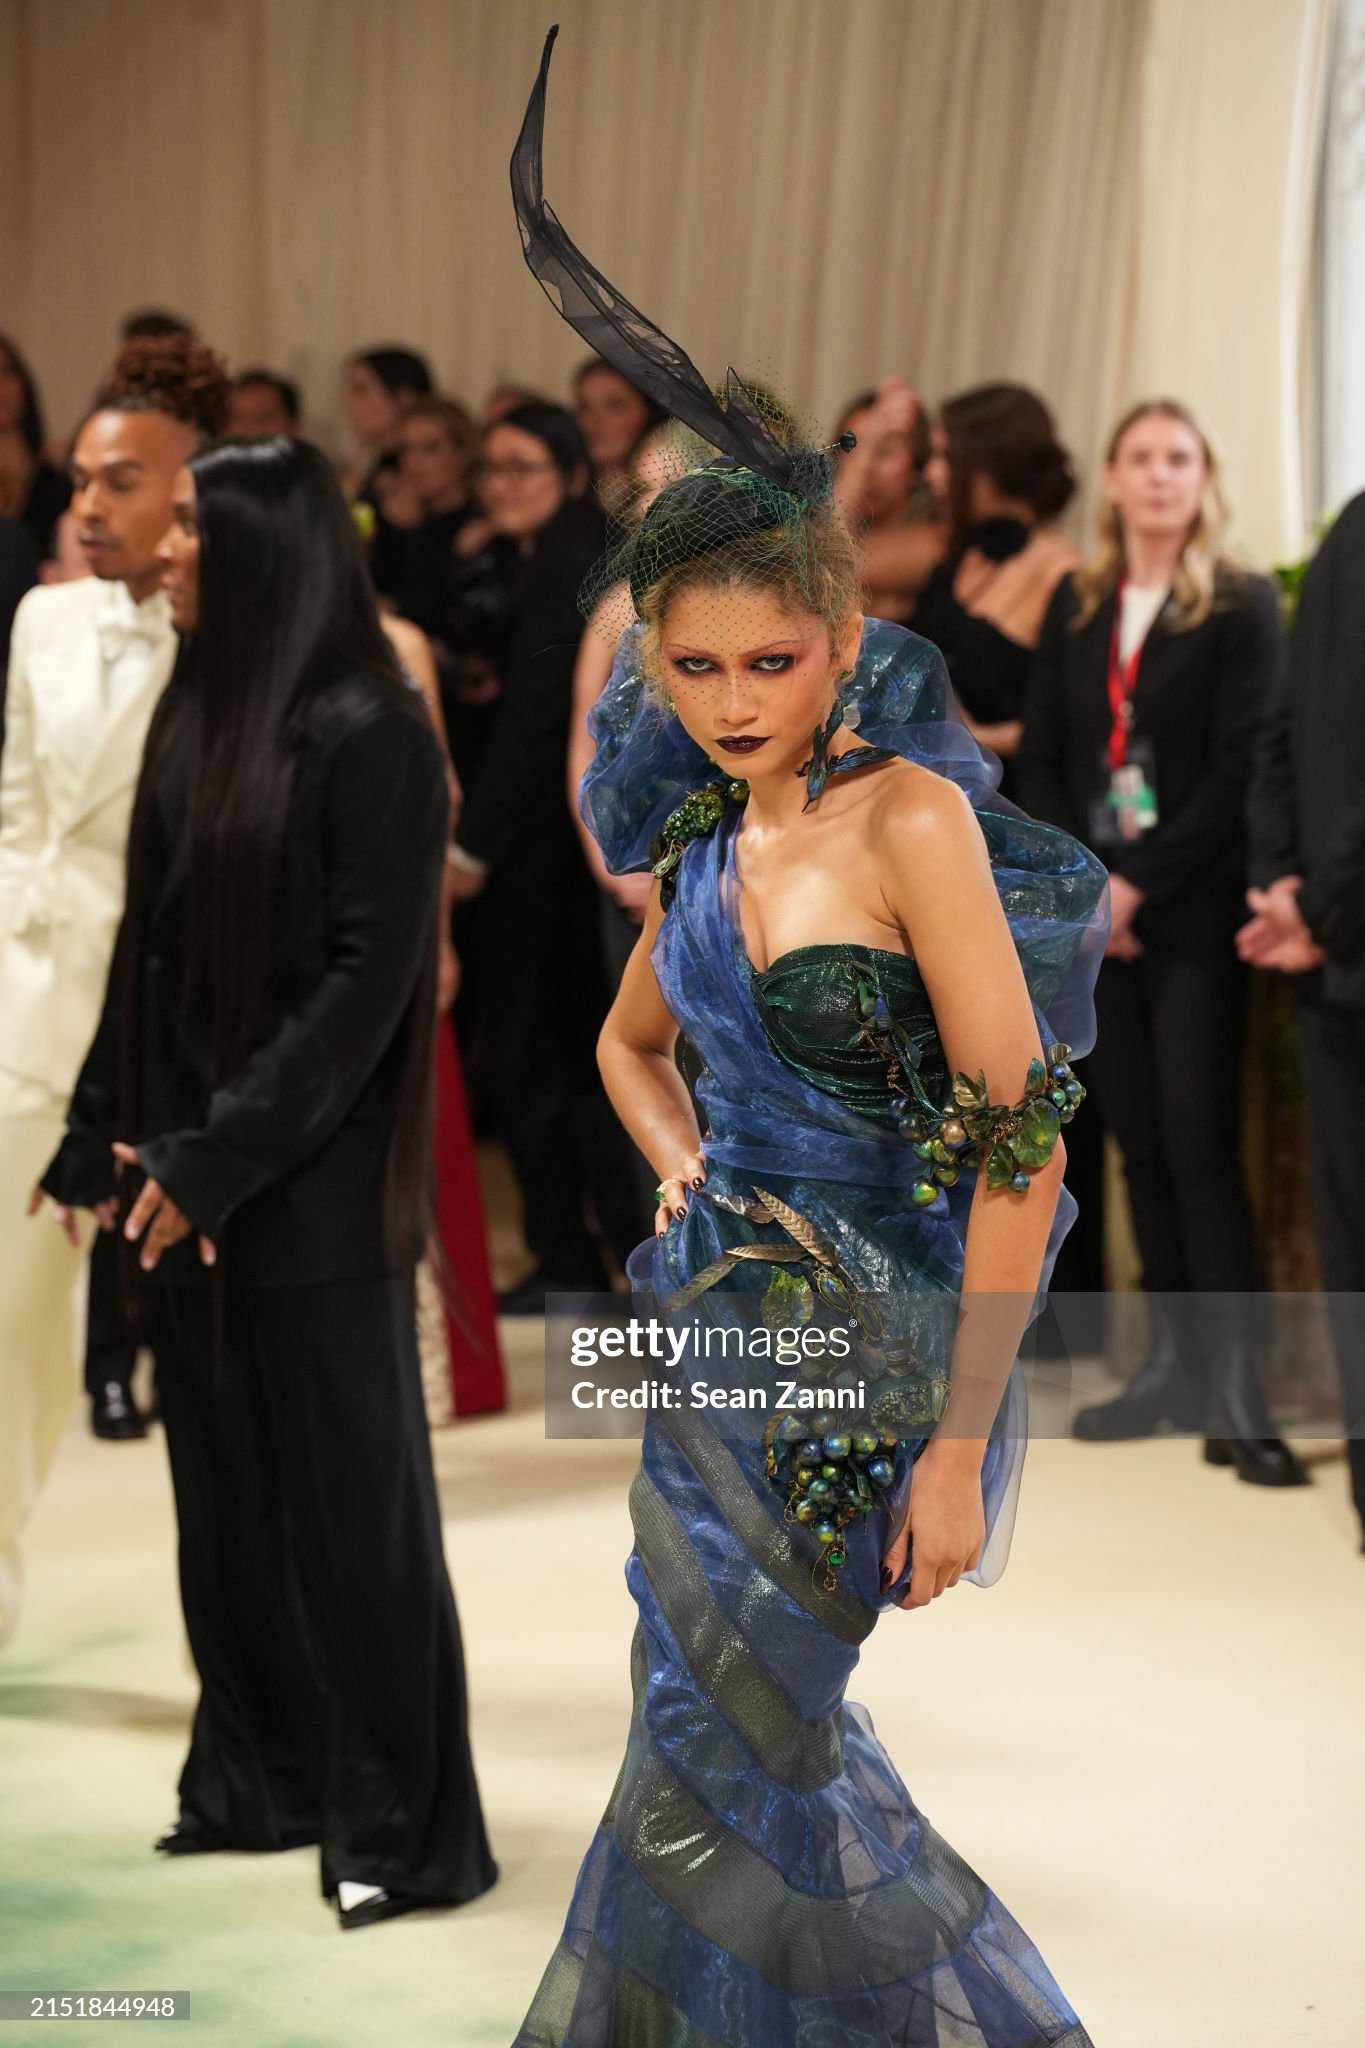 gettyimages-2151844948-2048x2048.jpg